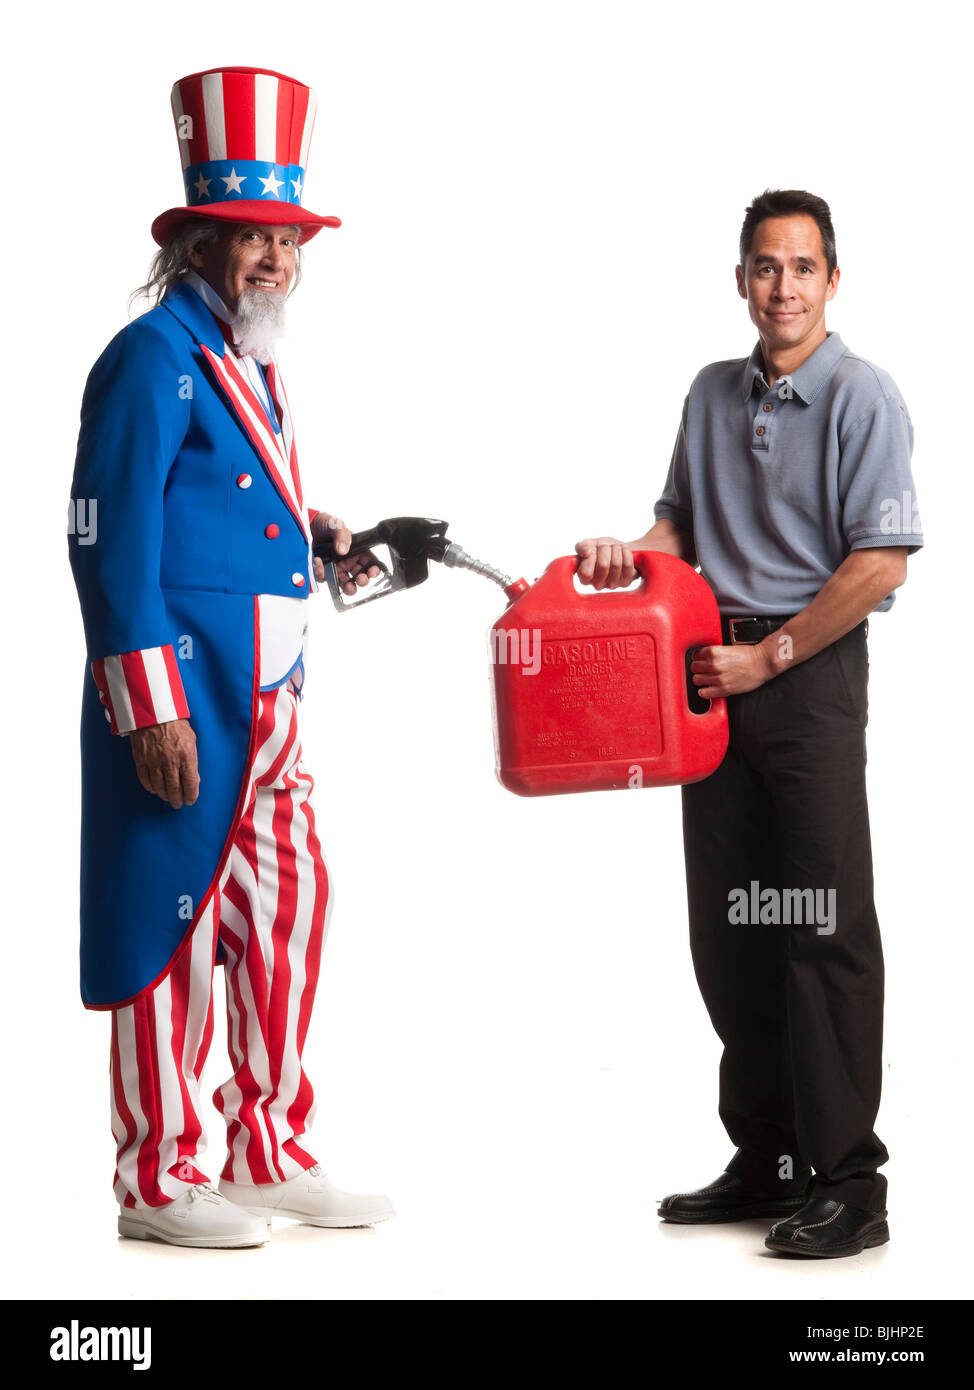 uncle sam holding a gasoline pump filling a man's gas can Stock Photo